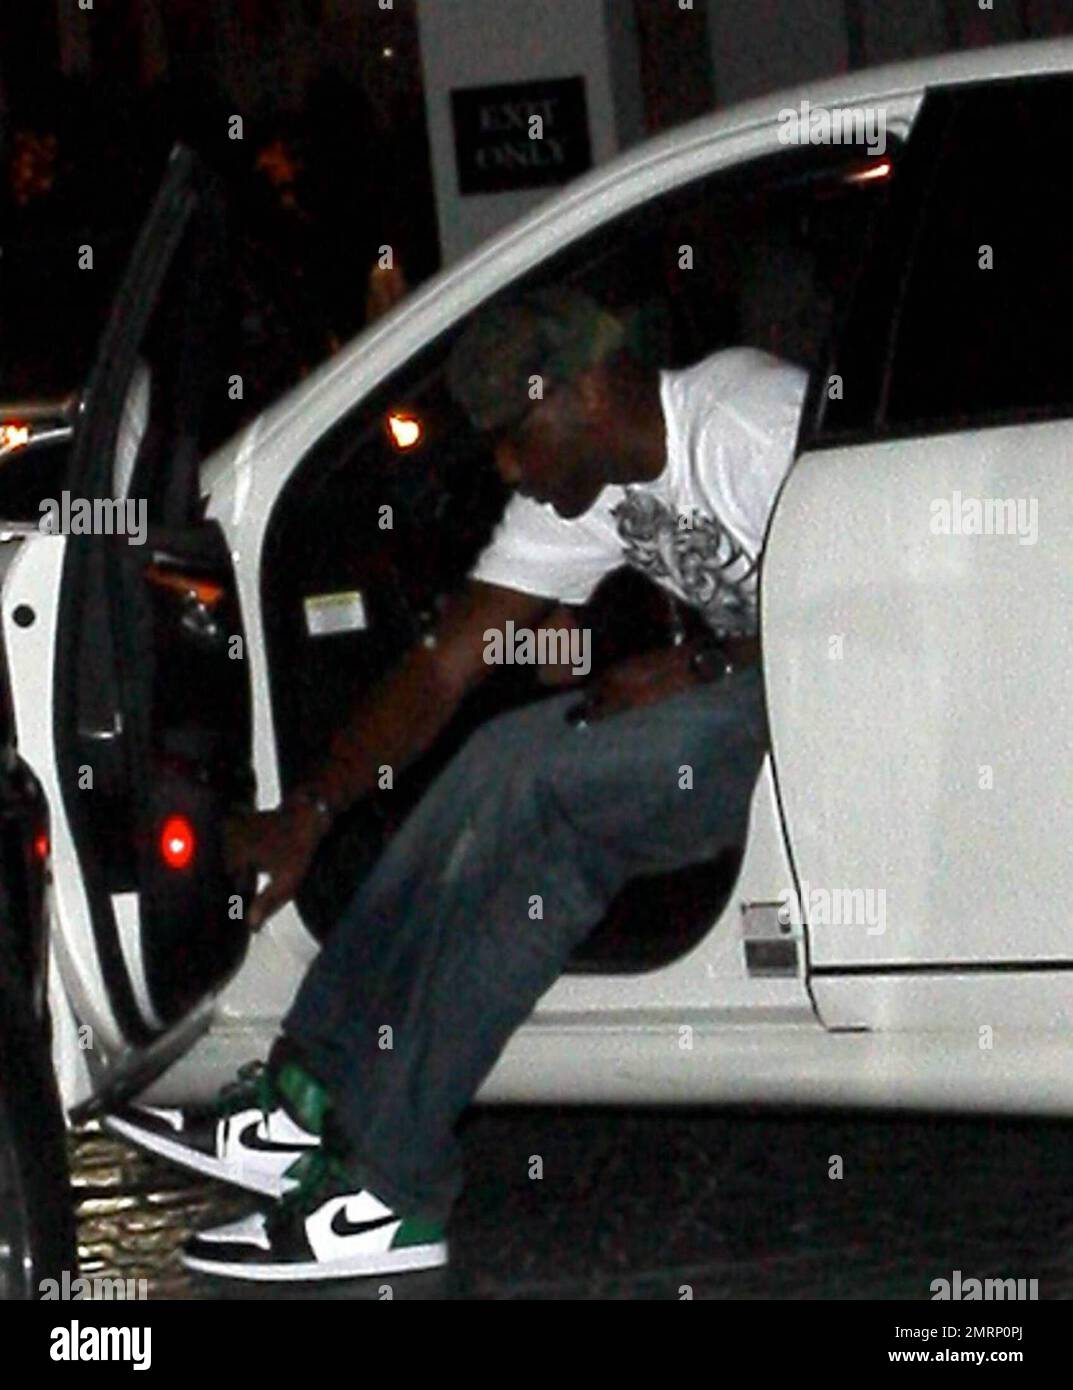 EXCLUSIVE!! Khloe Kardashian's new husband, LA Lakers player Lamar Odom, is alone as he leaves the hotel where the couple spent their first night together as husband and wife earlier this week. Odom, carrying a bottle of perfume or cologne and wearing jeans, a t shirt and sneakers, waves his hat as he gets in his car to leave. Los Angeles, CA. 10/2/09. Stock Photo